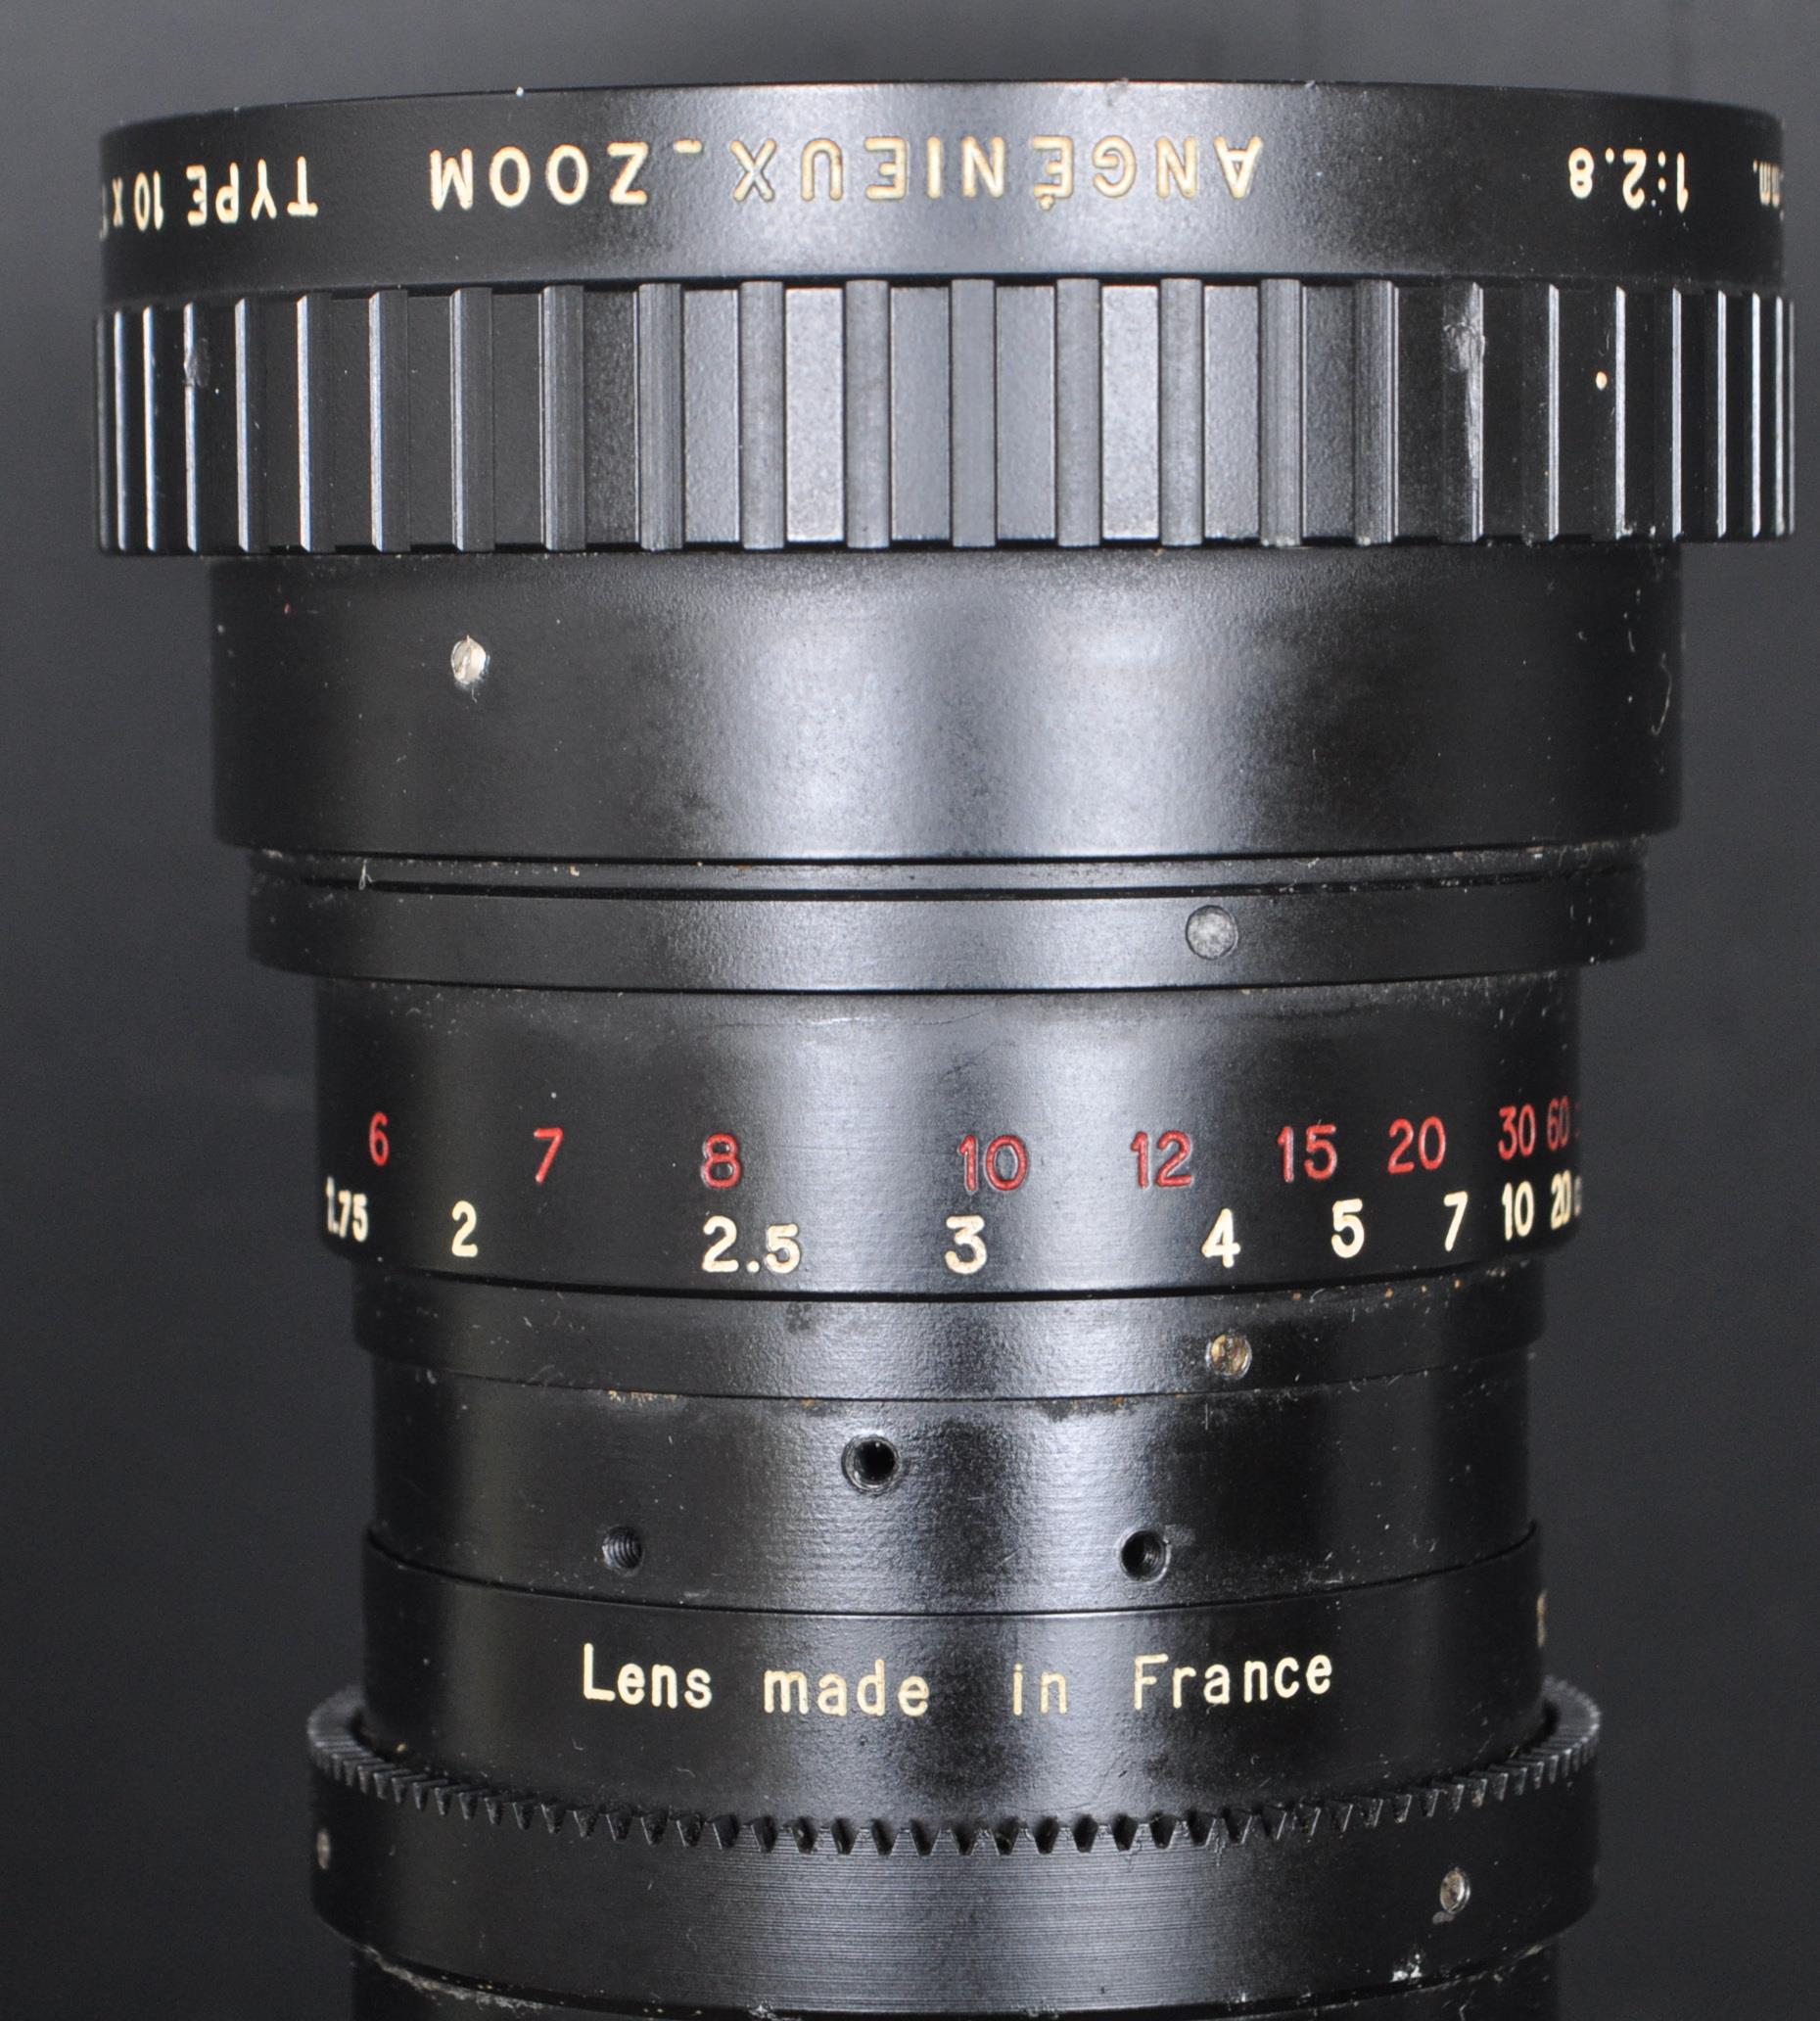 CONTEMPORARY ANGENIEUX ZOOM LENS - 15 - 150MM LENS - Image 5 of 5